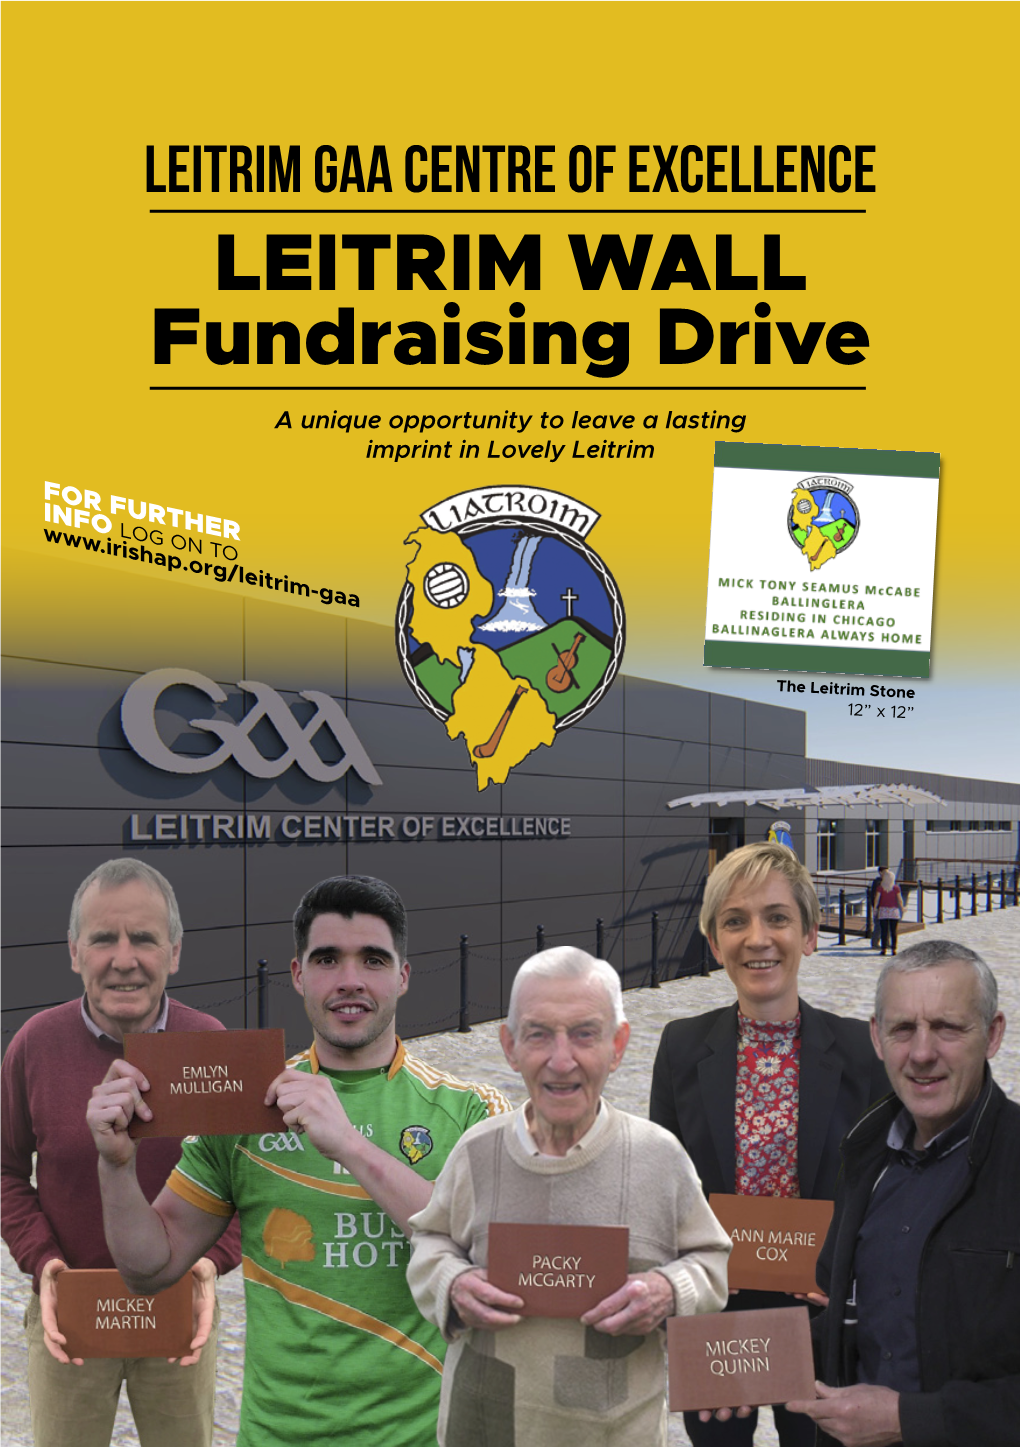 LEITRIM WALL Fundraising Drive a Unique Opportunity to Leave a Lasting Imprint in Lovely Leitrim for FURTHER INF LOG on TO